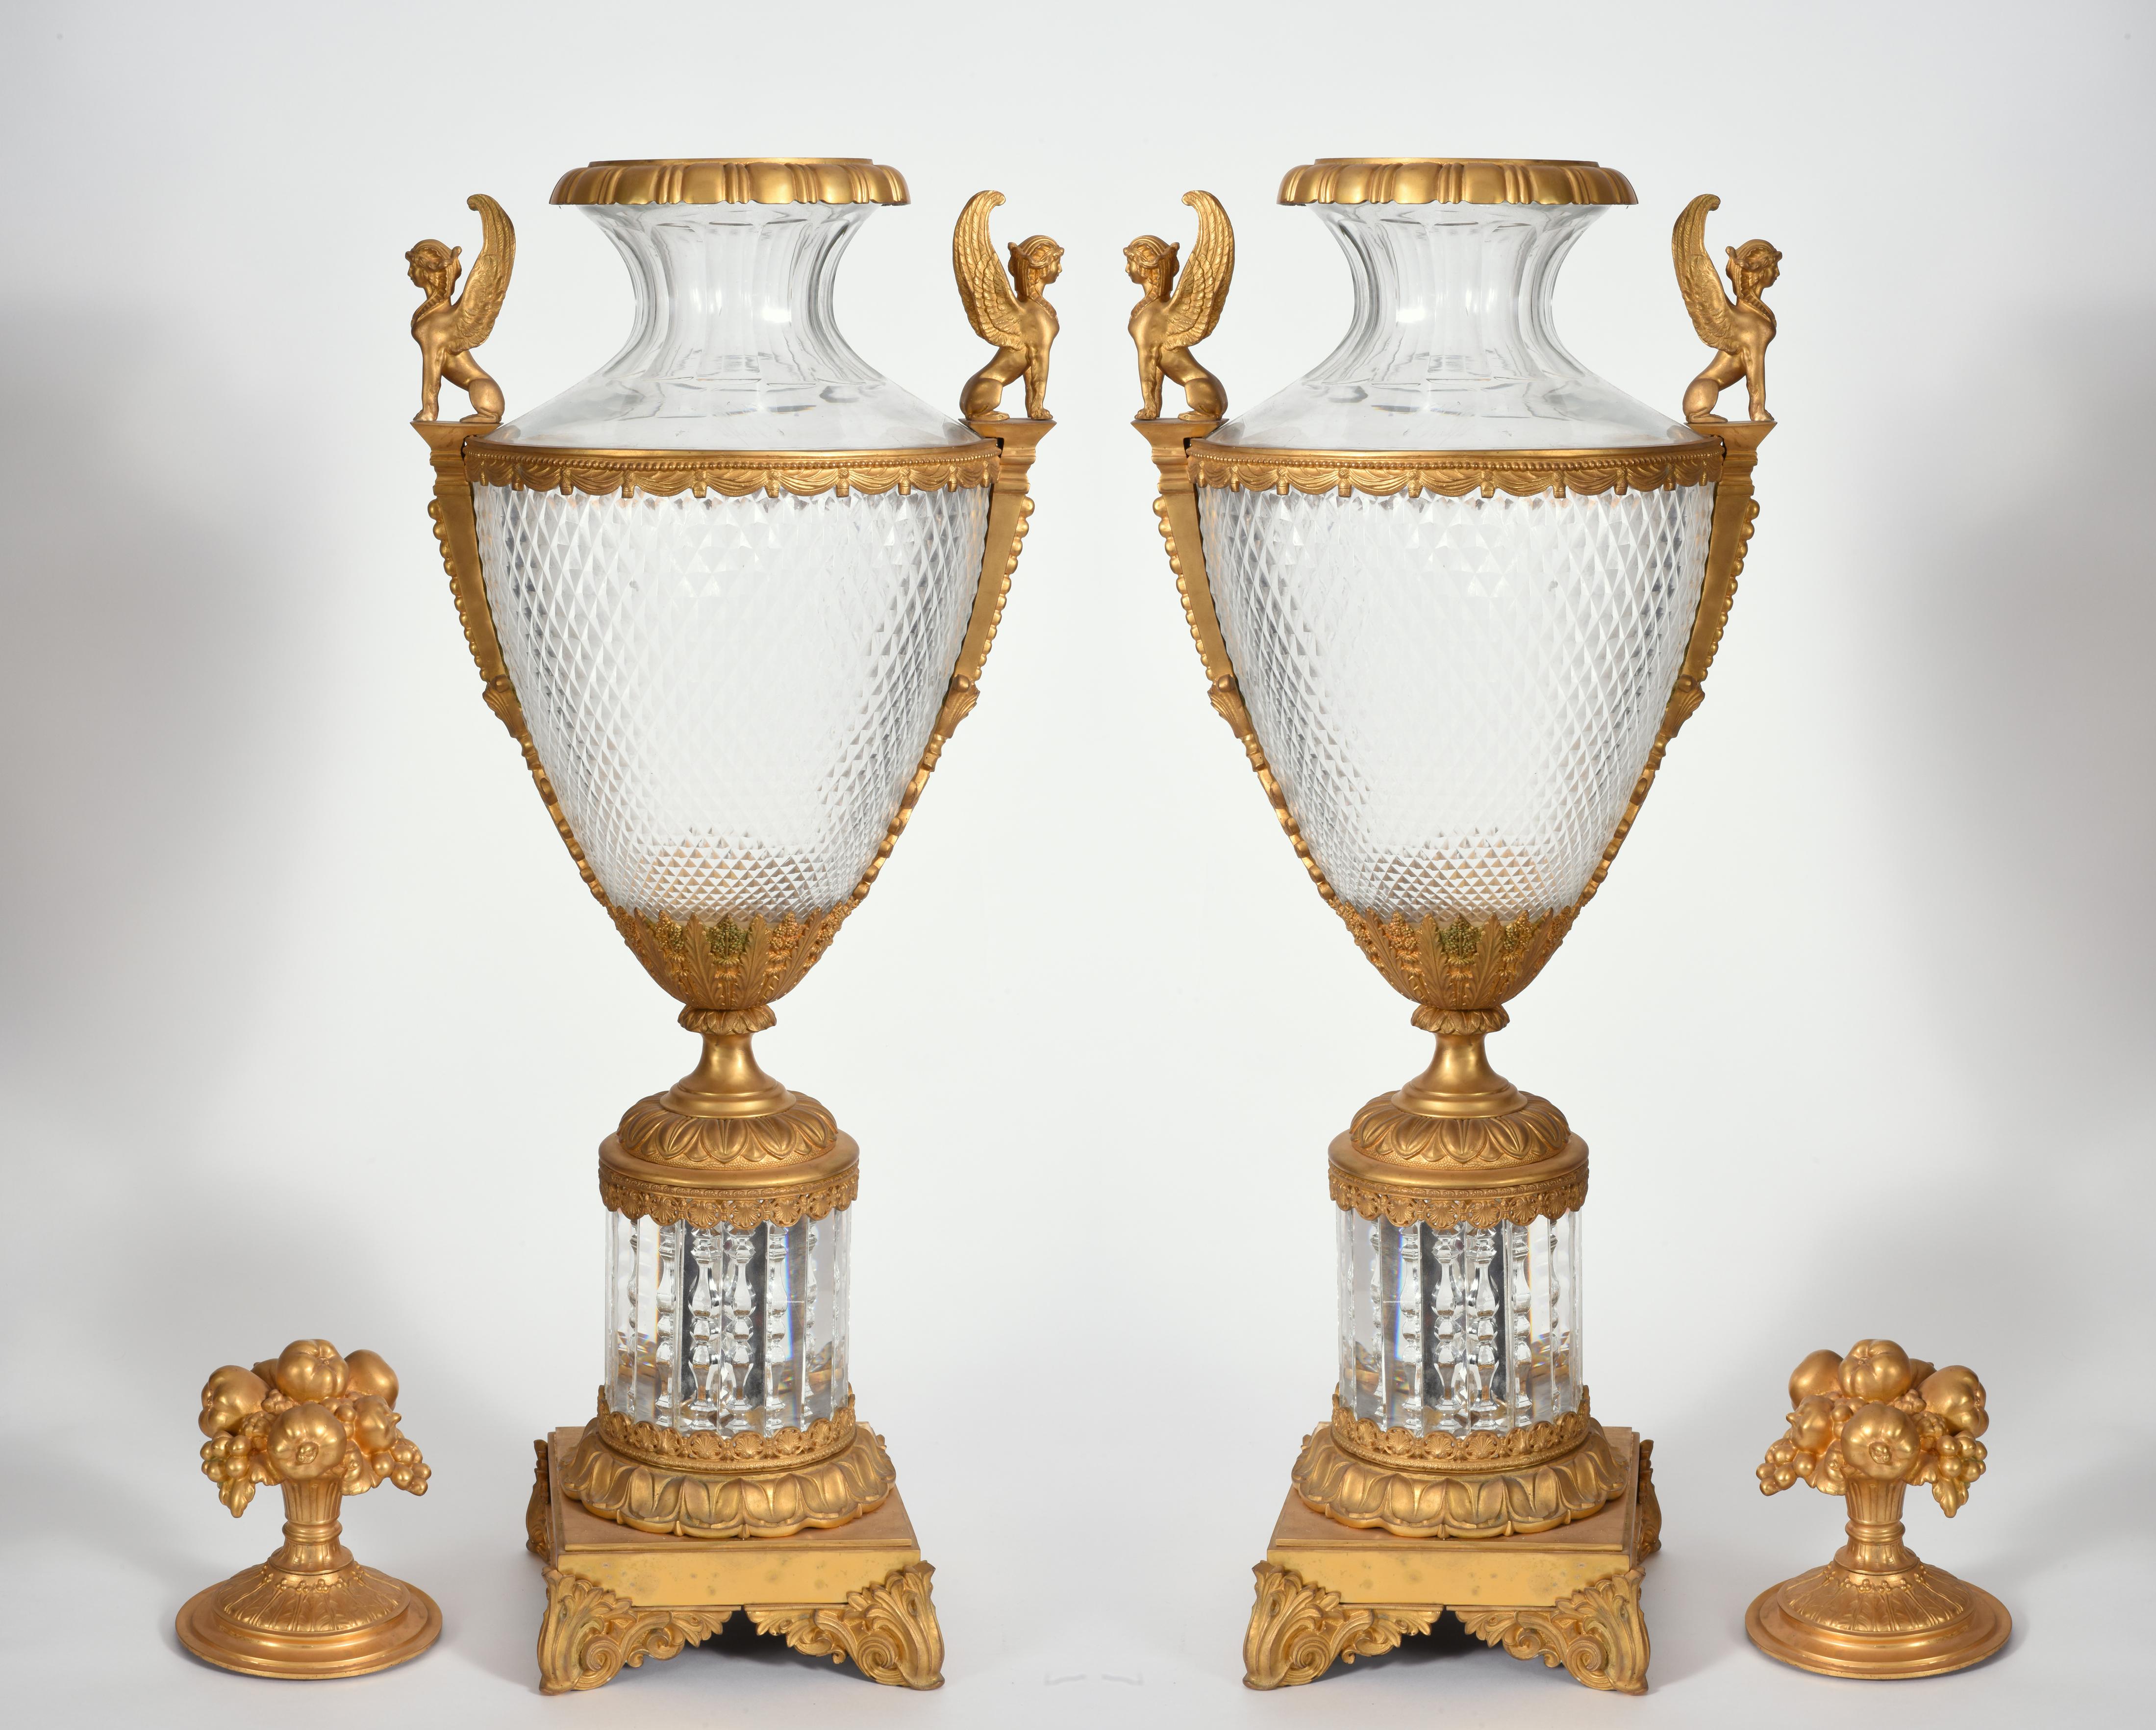 Neoclassical Mid-19th Century Large Matching Pair of Bronze or Cut Glass Urns